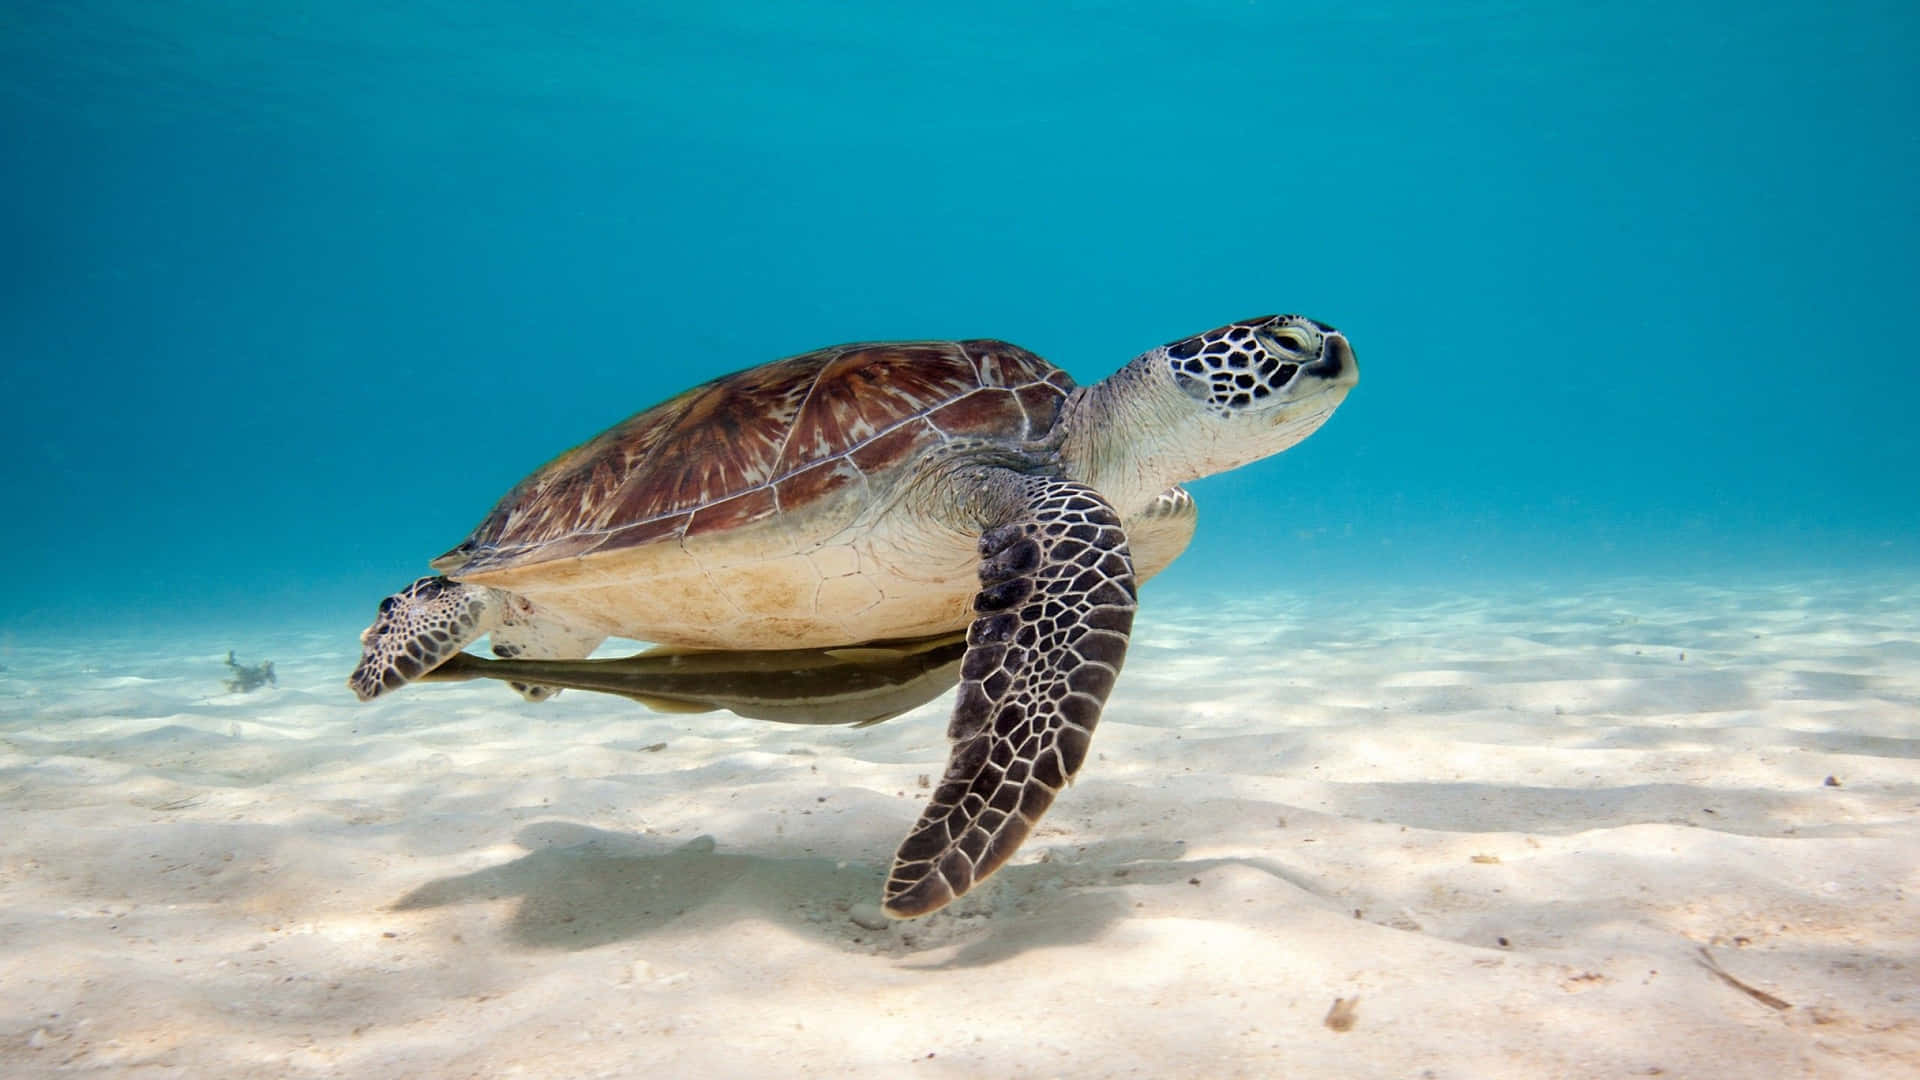 Protect your iPhone with an adorable turtle HD wallpaper Wallpaper